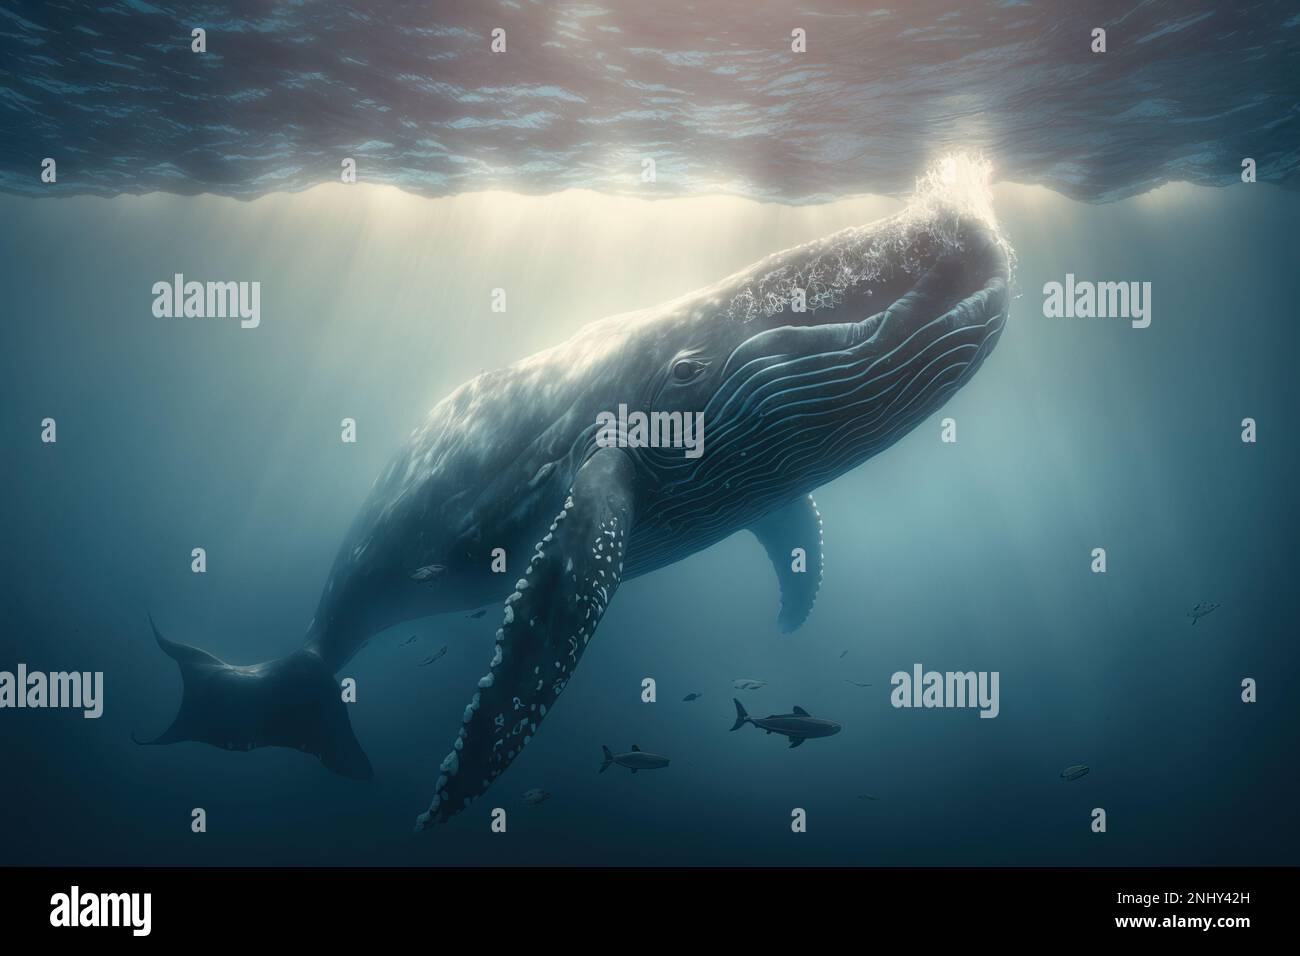 A whale swimming in the ocean with other animals nearby in the water with  sunlight shining on the water ocean a digital painting rayonism Stock Photo  - Alamy